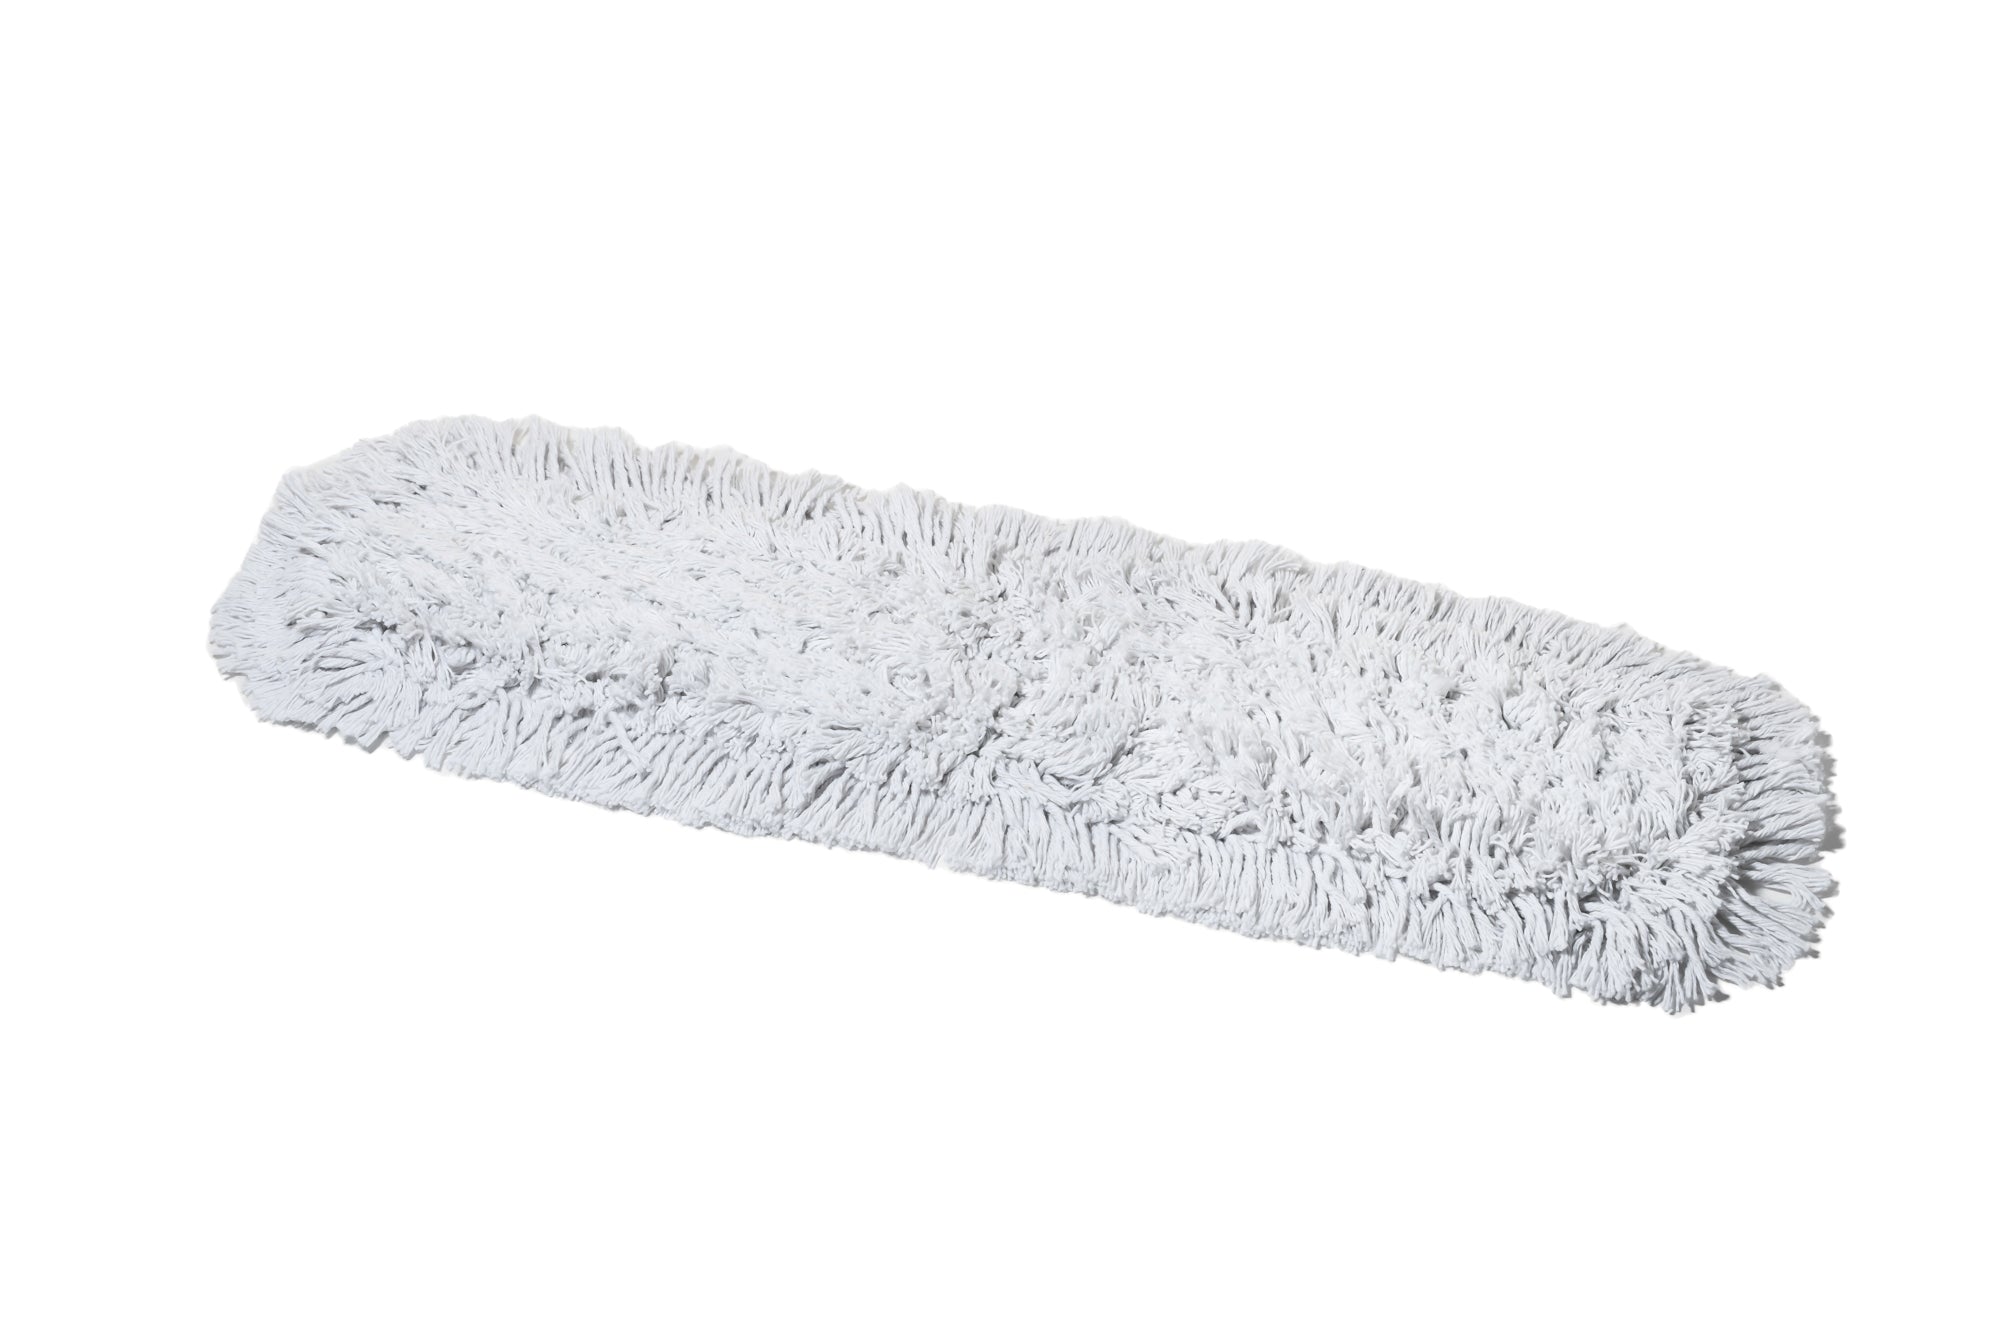 Tidy Tools 24 Inch Cotton Dust Mop Refill